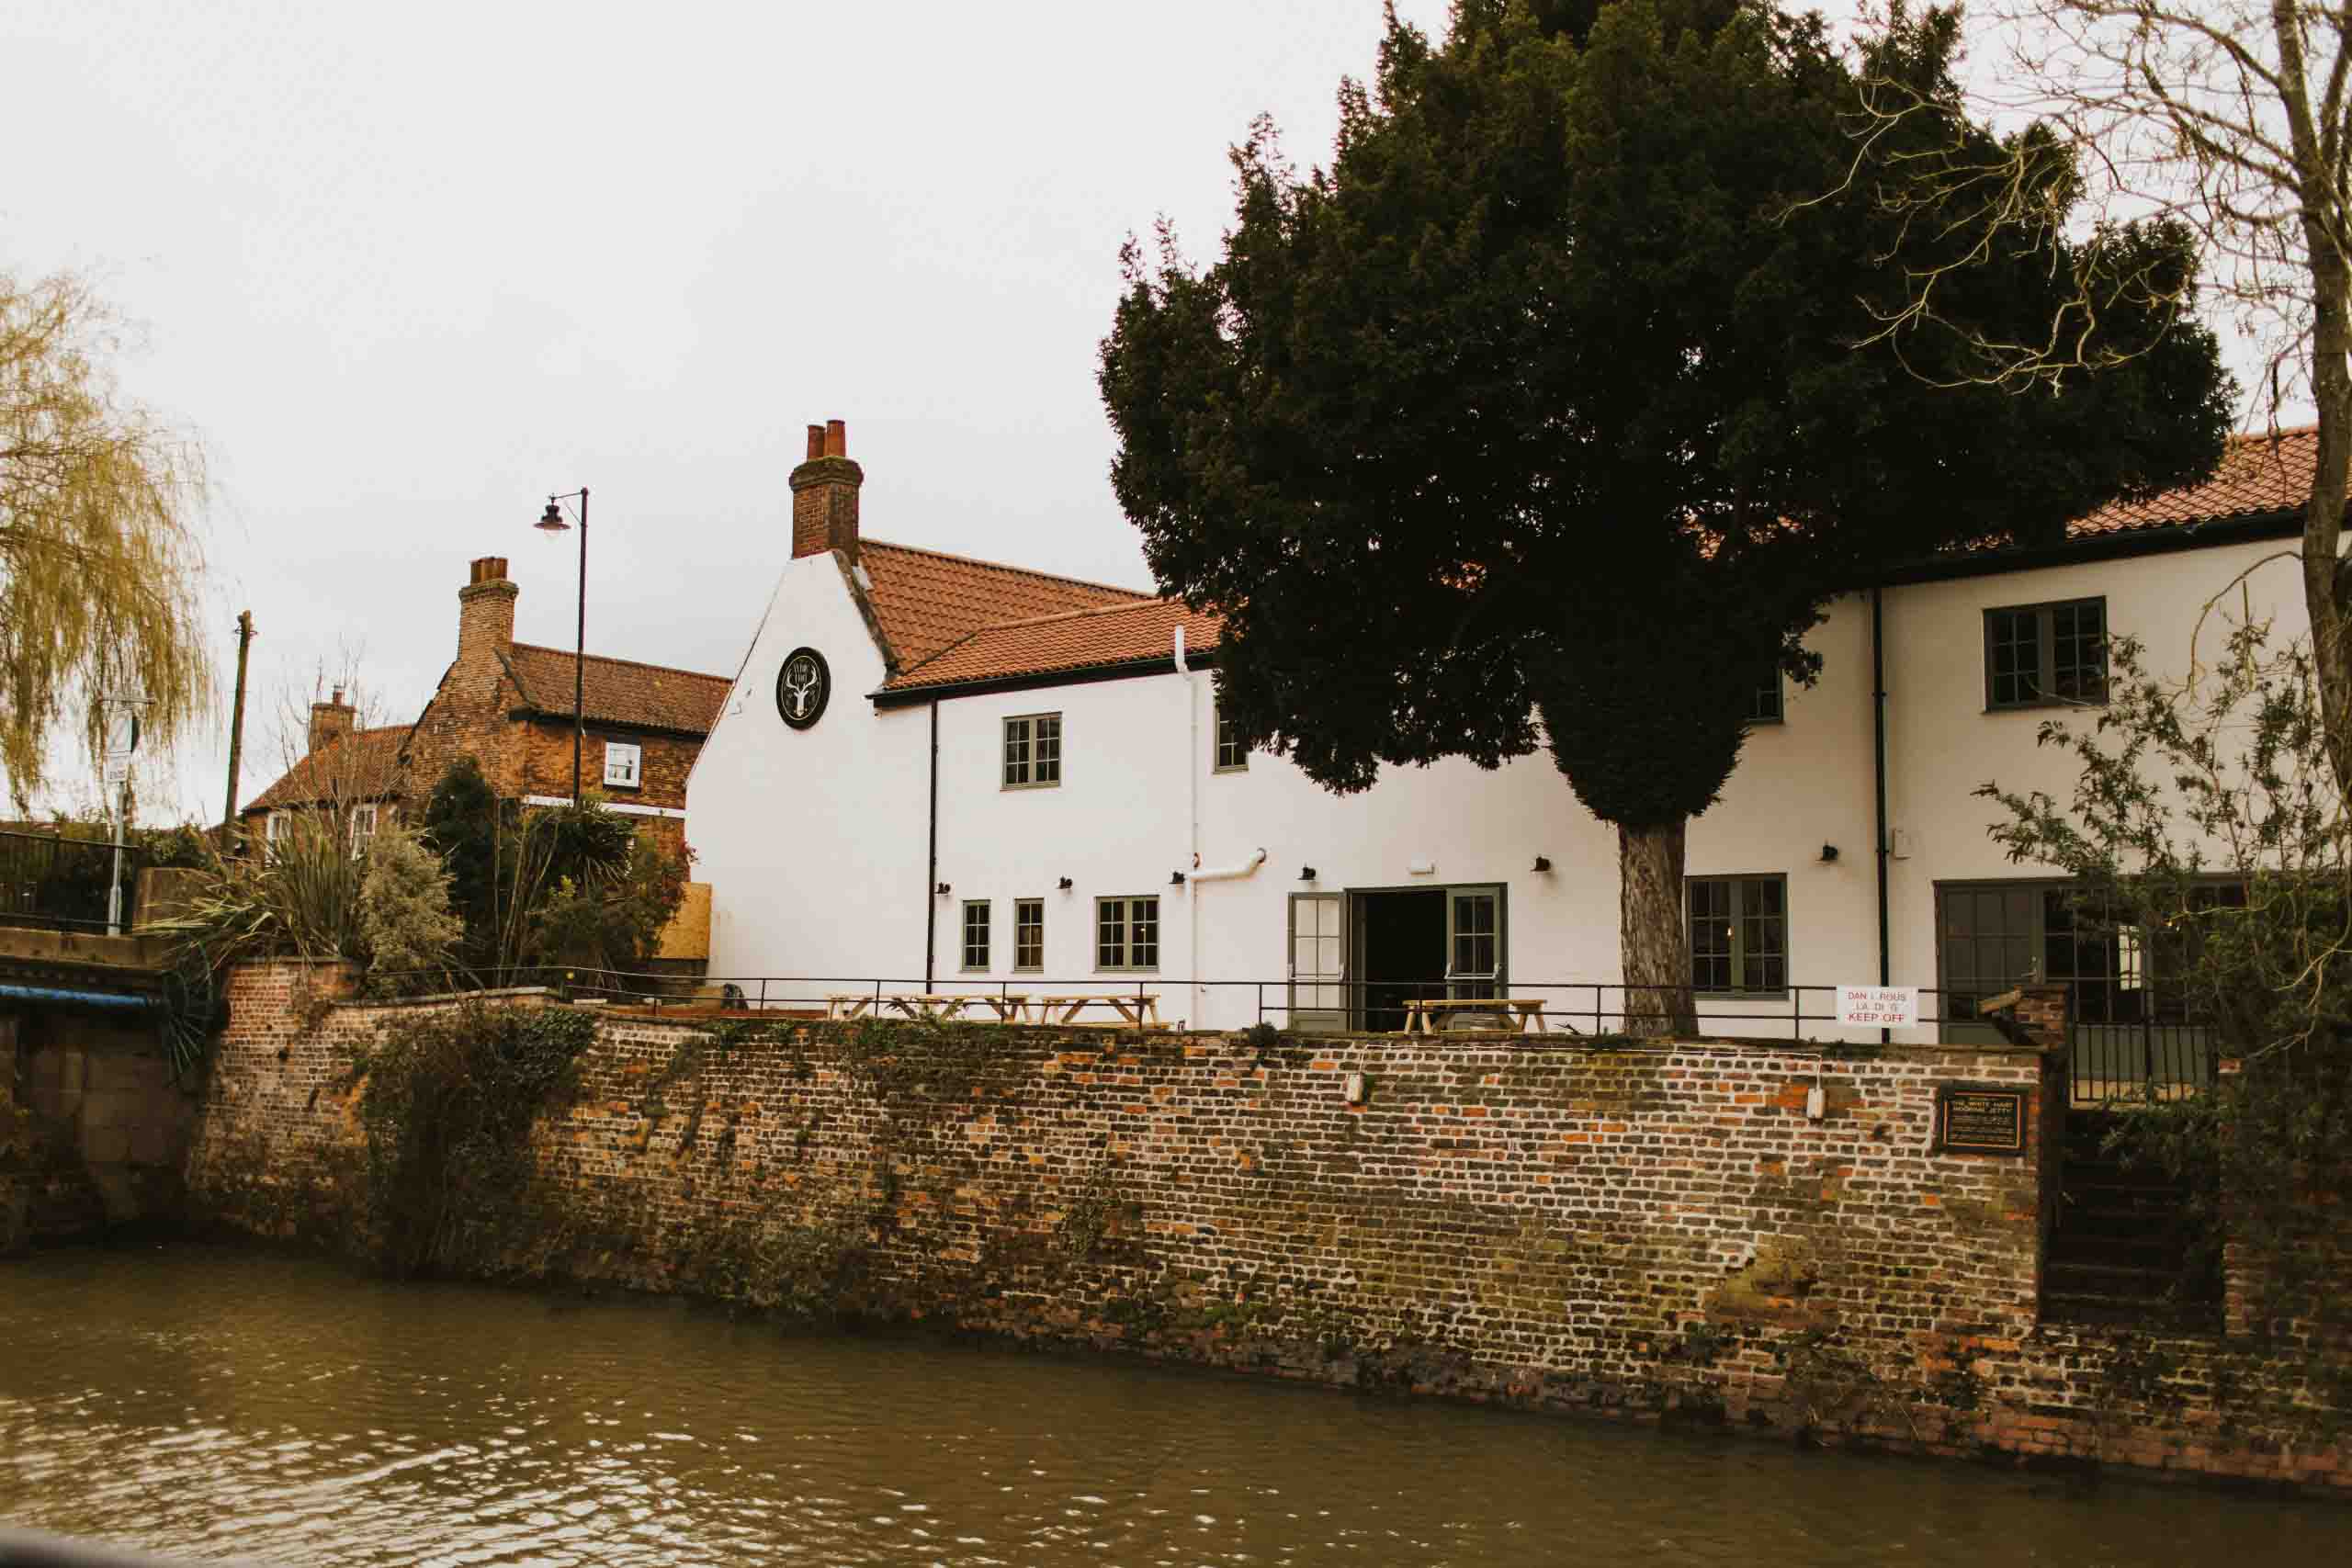 Self-catering wedding venue with pub